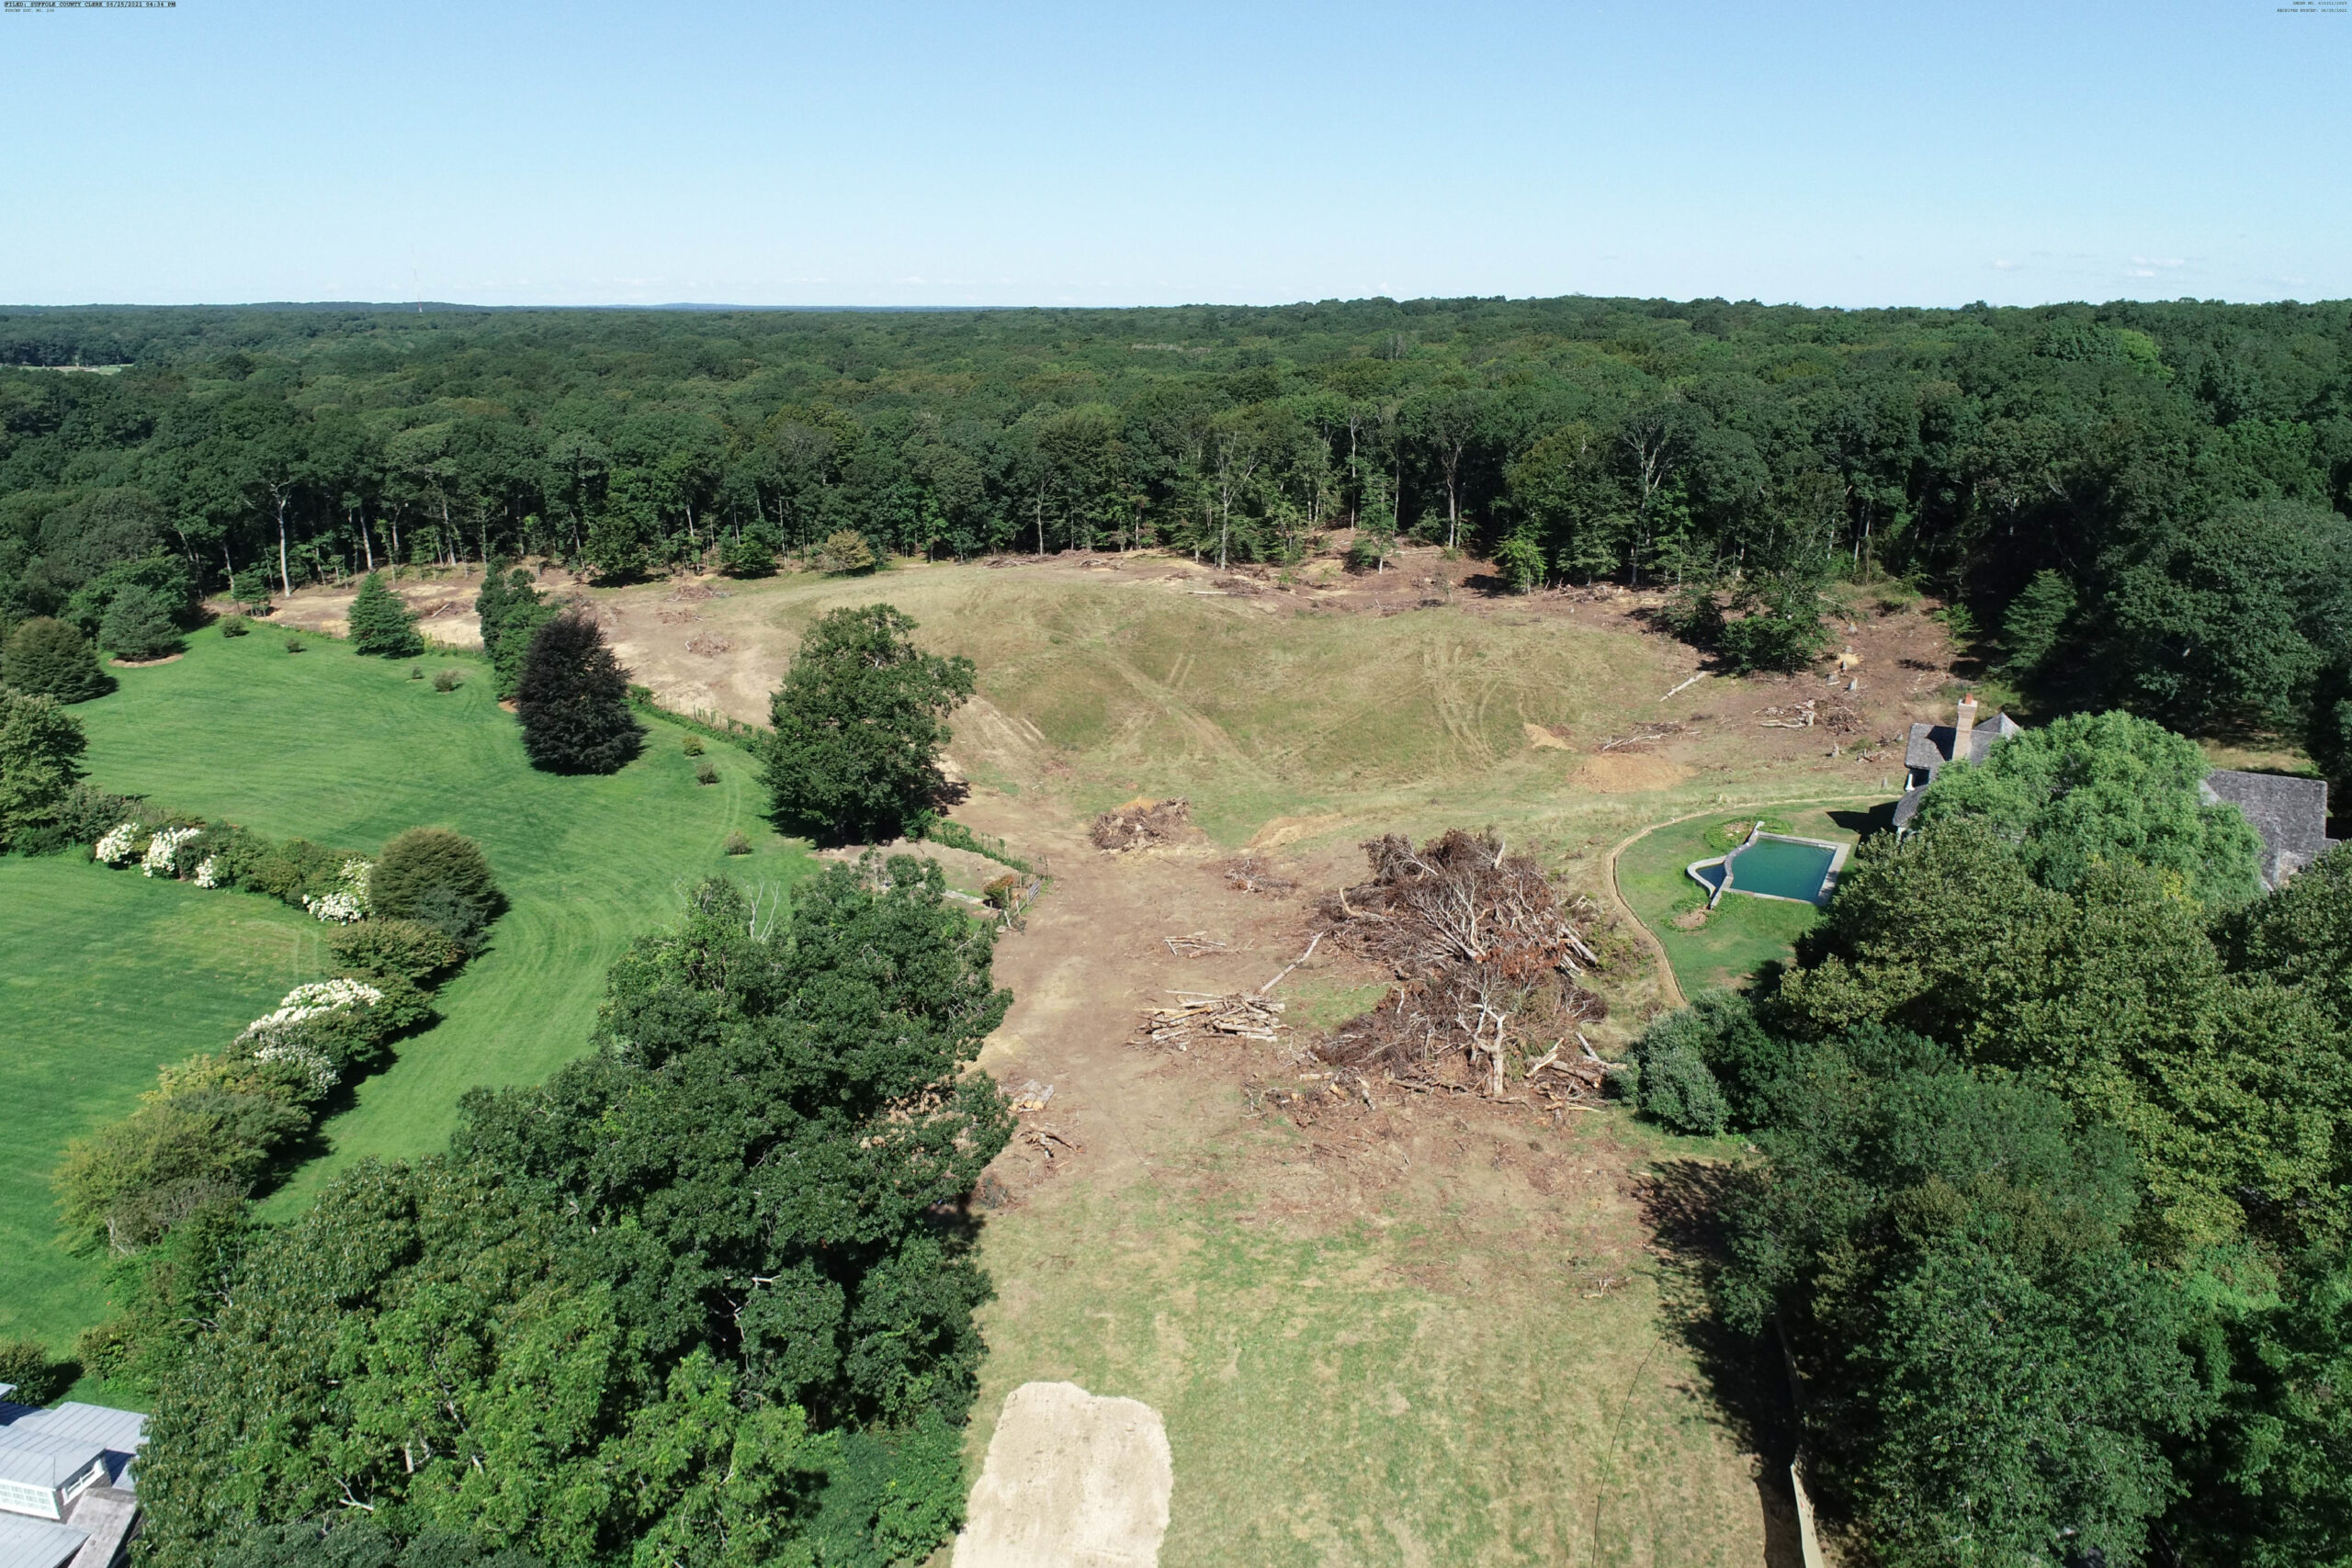 The Peconic Land Trust sued Randy Lerner in 2019 after Lerner cut down trees around a pasture on land he purchased adjacent to his house on Town Lane. He says he plans to use the land, which is part of the agricultural reserve for the Stony Hill subdivision, as an orchard or to grow pumpkins but the Trust says an easement precluded the removal of trees regardless of the purpose.      COURTESY PECONIC LAND TRUST